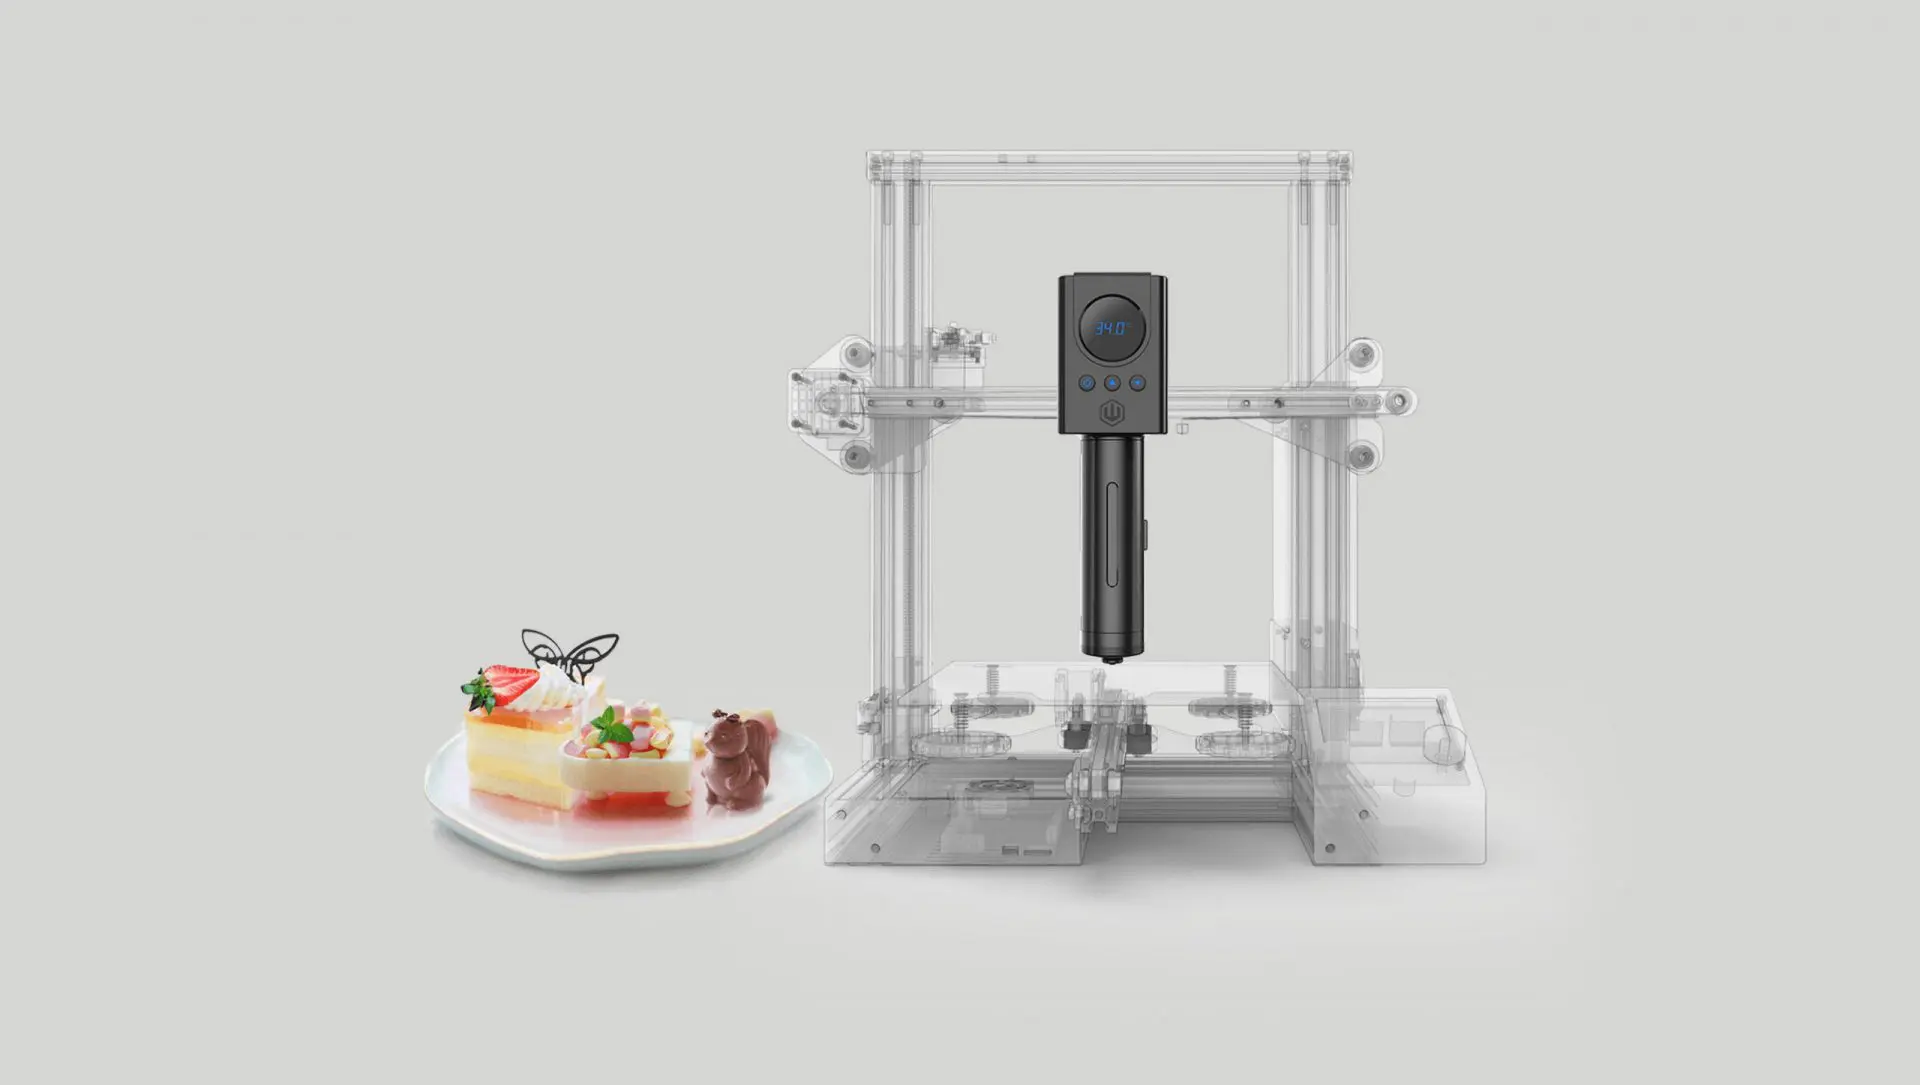 luckybot food 3d printer - with some examples